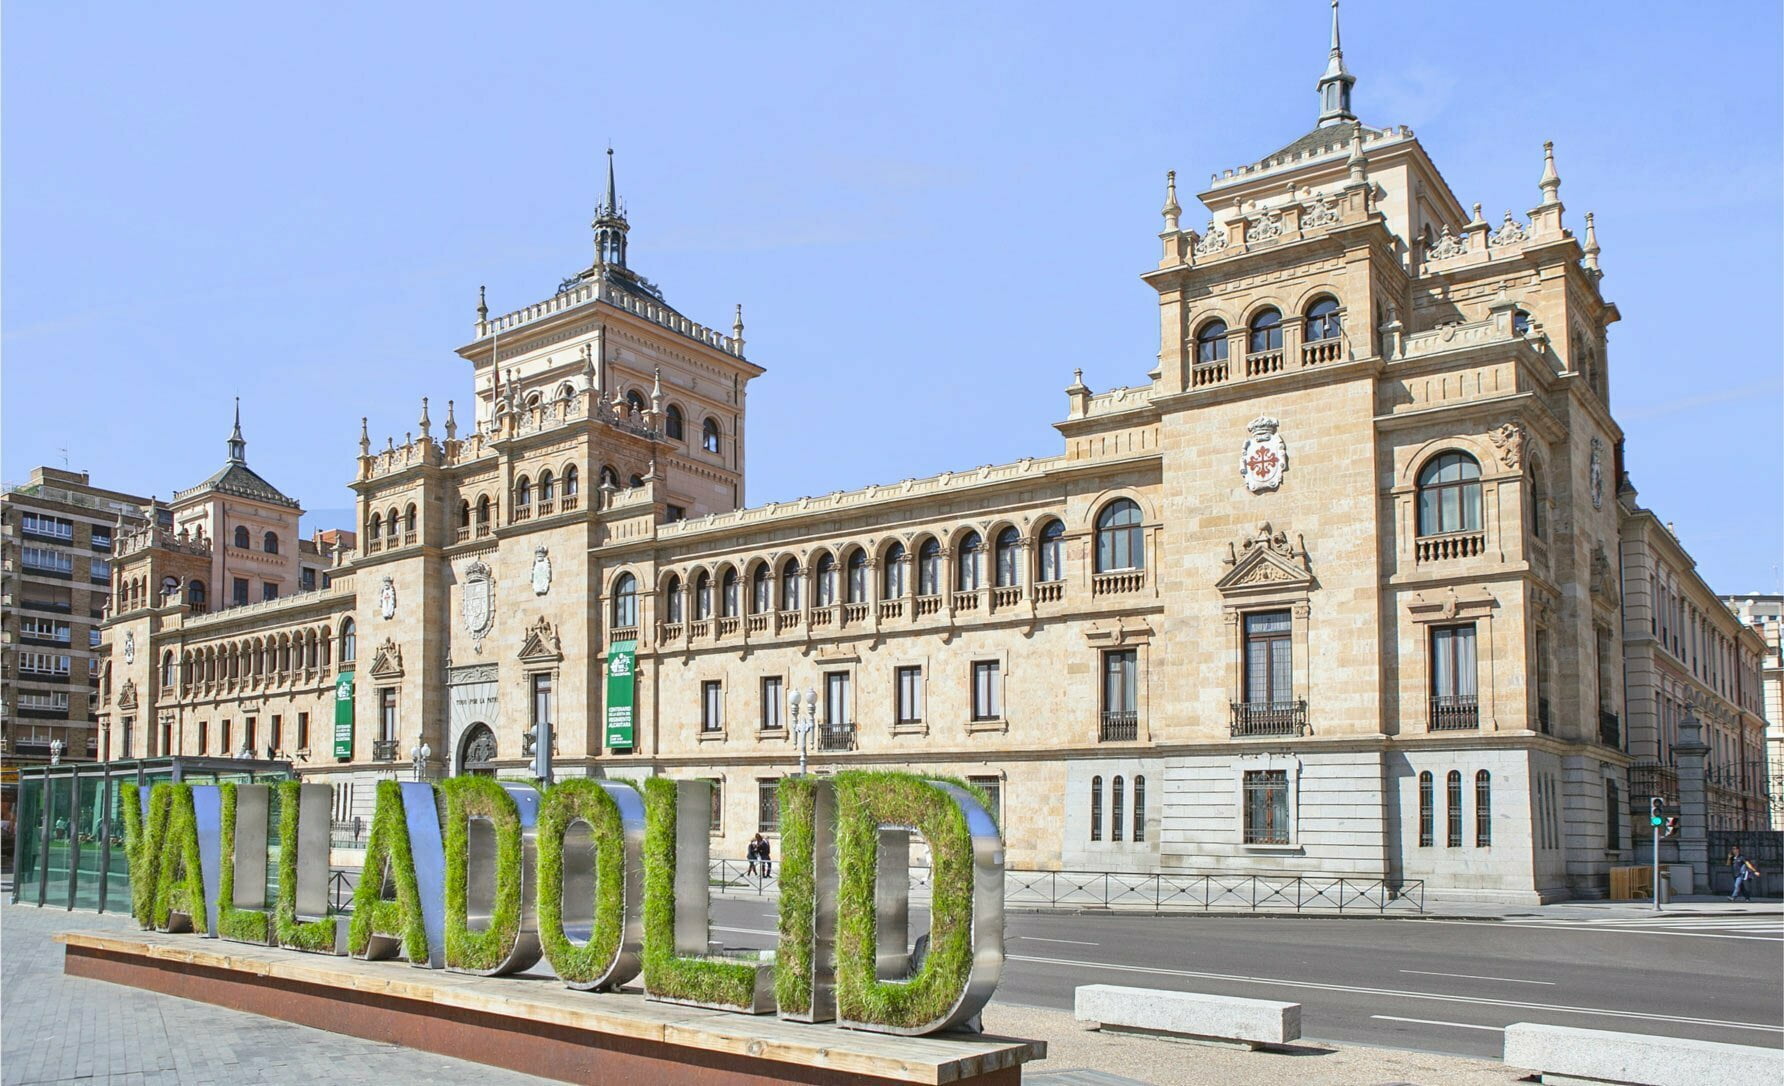 Valladolid all-set to host the Concours Mondial de Bruxelles’ first session of the year